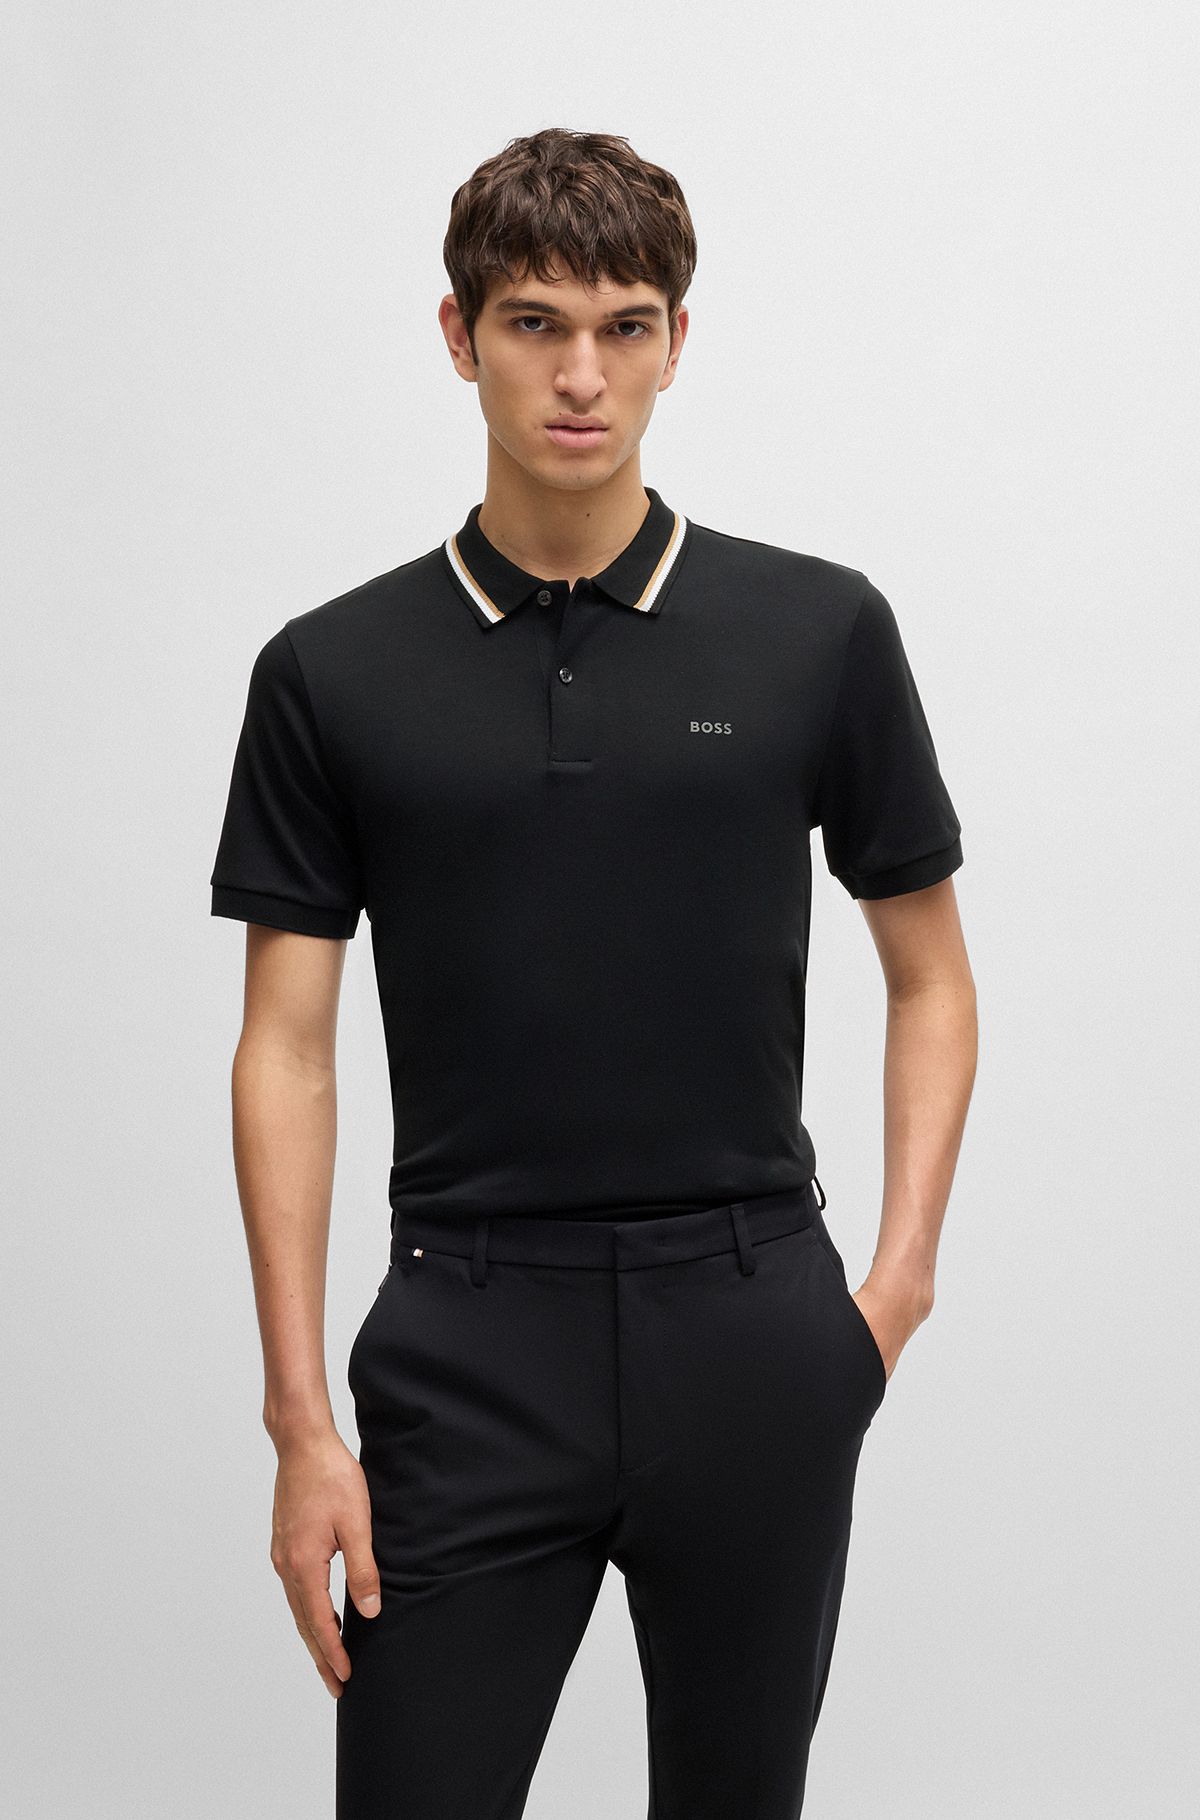 BOSS - Slim-fit polo shirt in cotton with striped collar